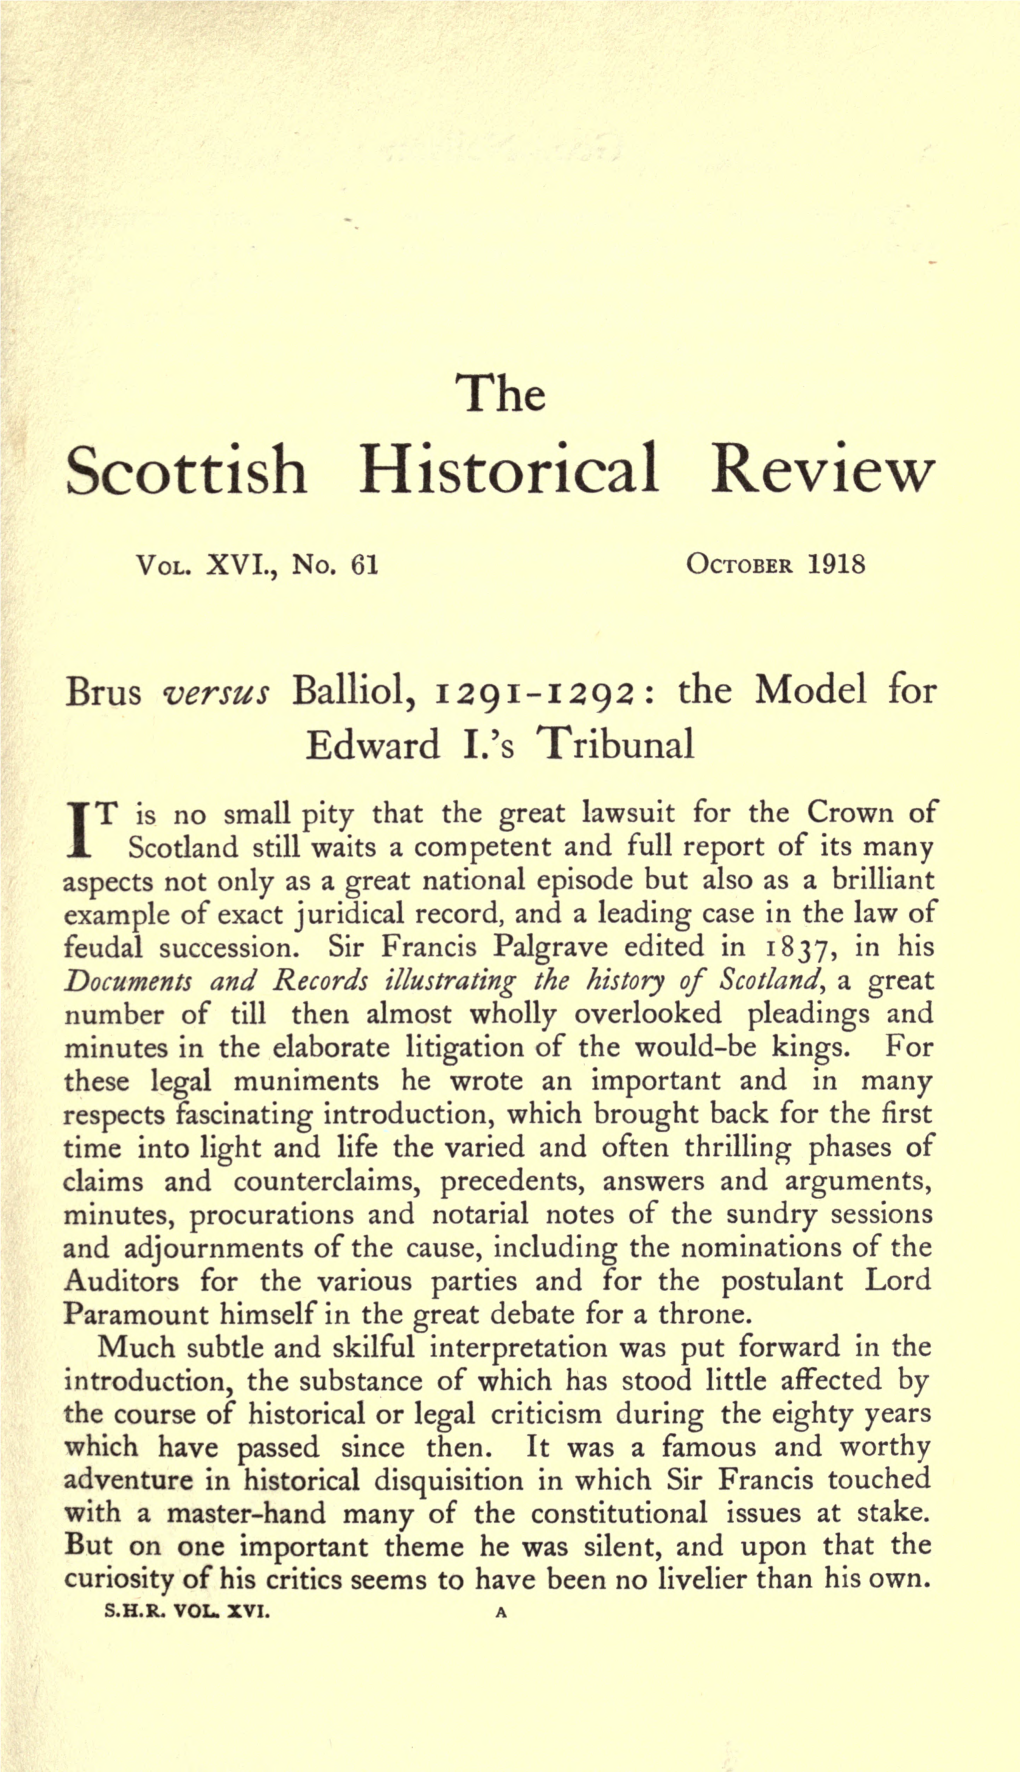 The Scottish Historical Review